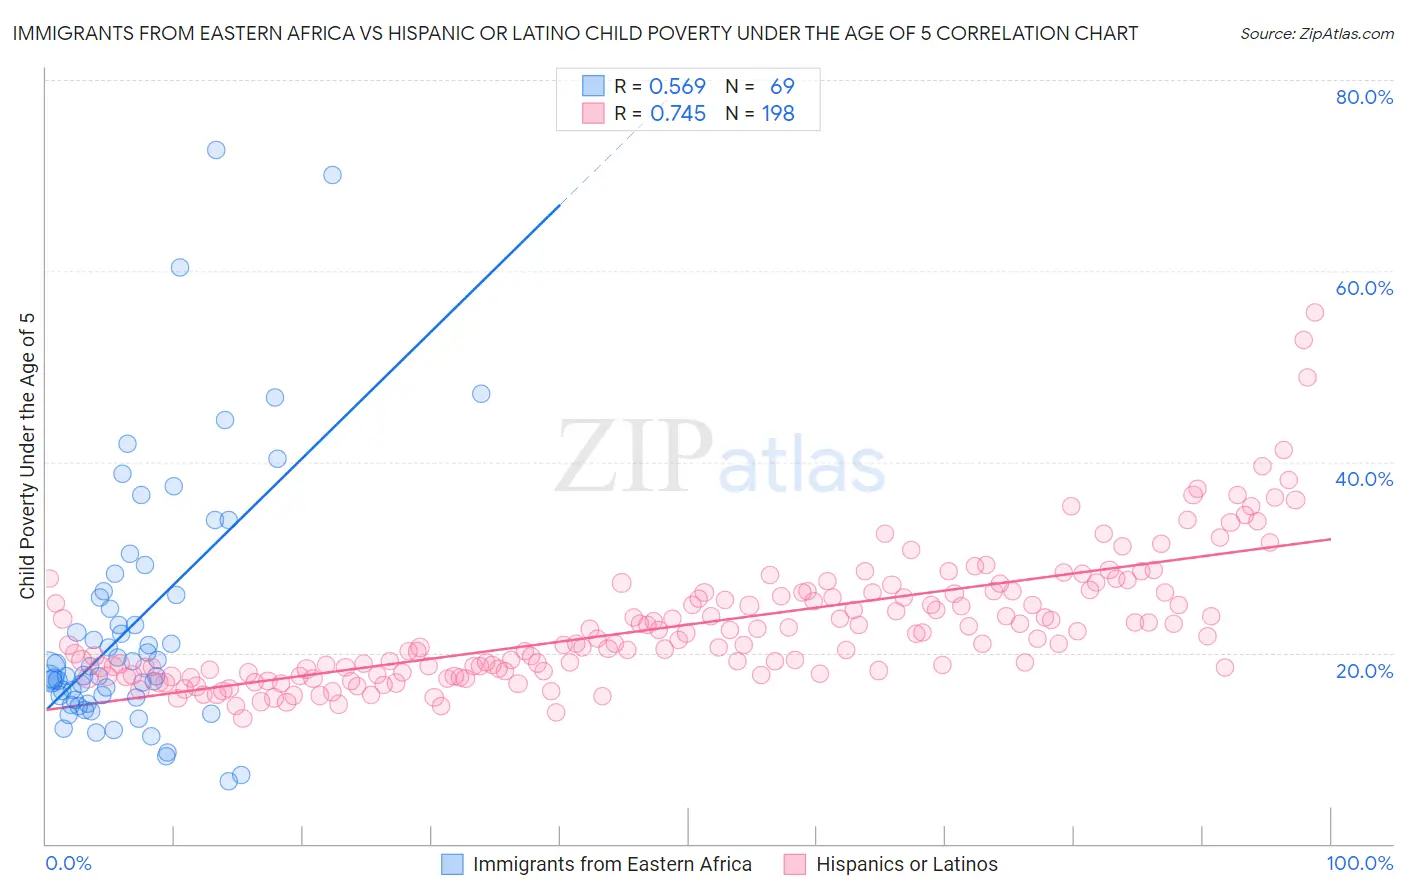 Immigrants from Eastern Africa vs Hispanic or Latino Child Poverty Under the Age of 5